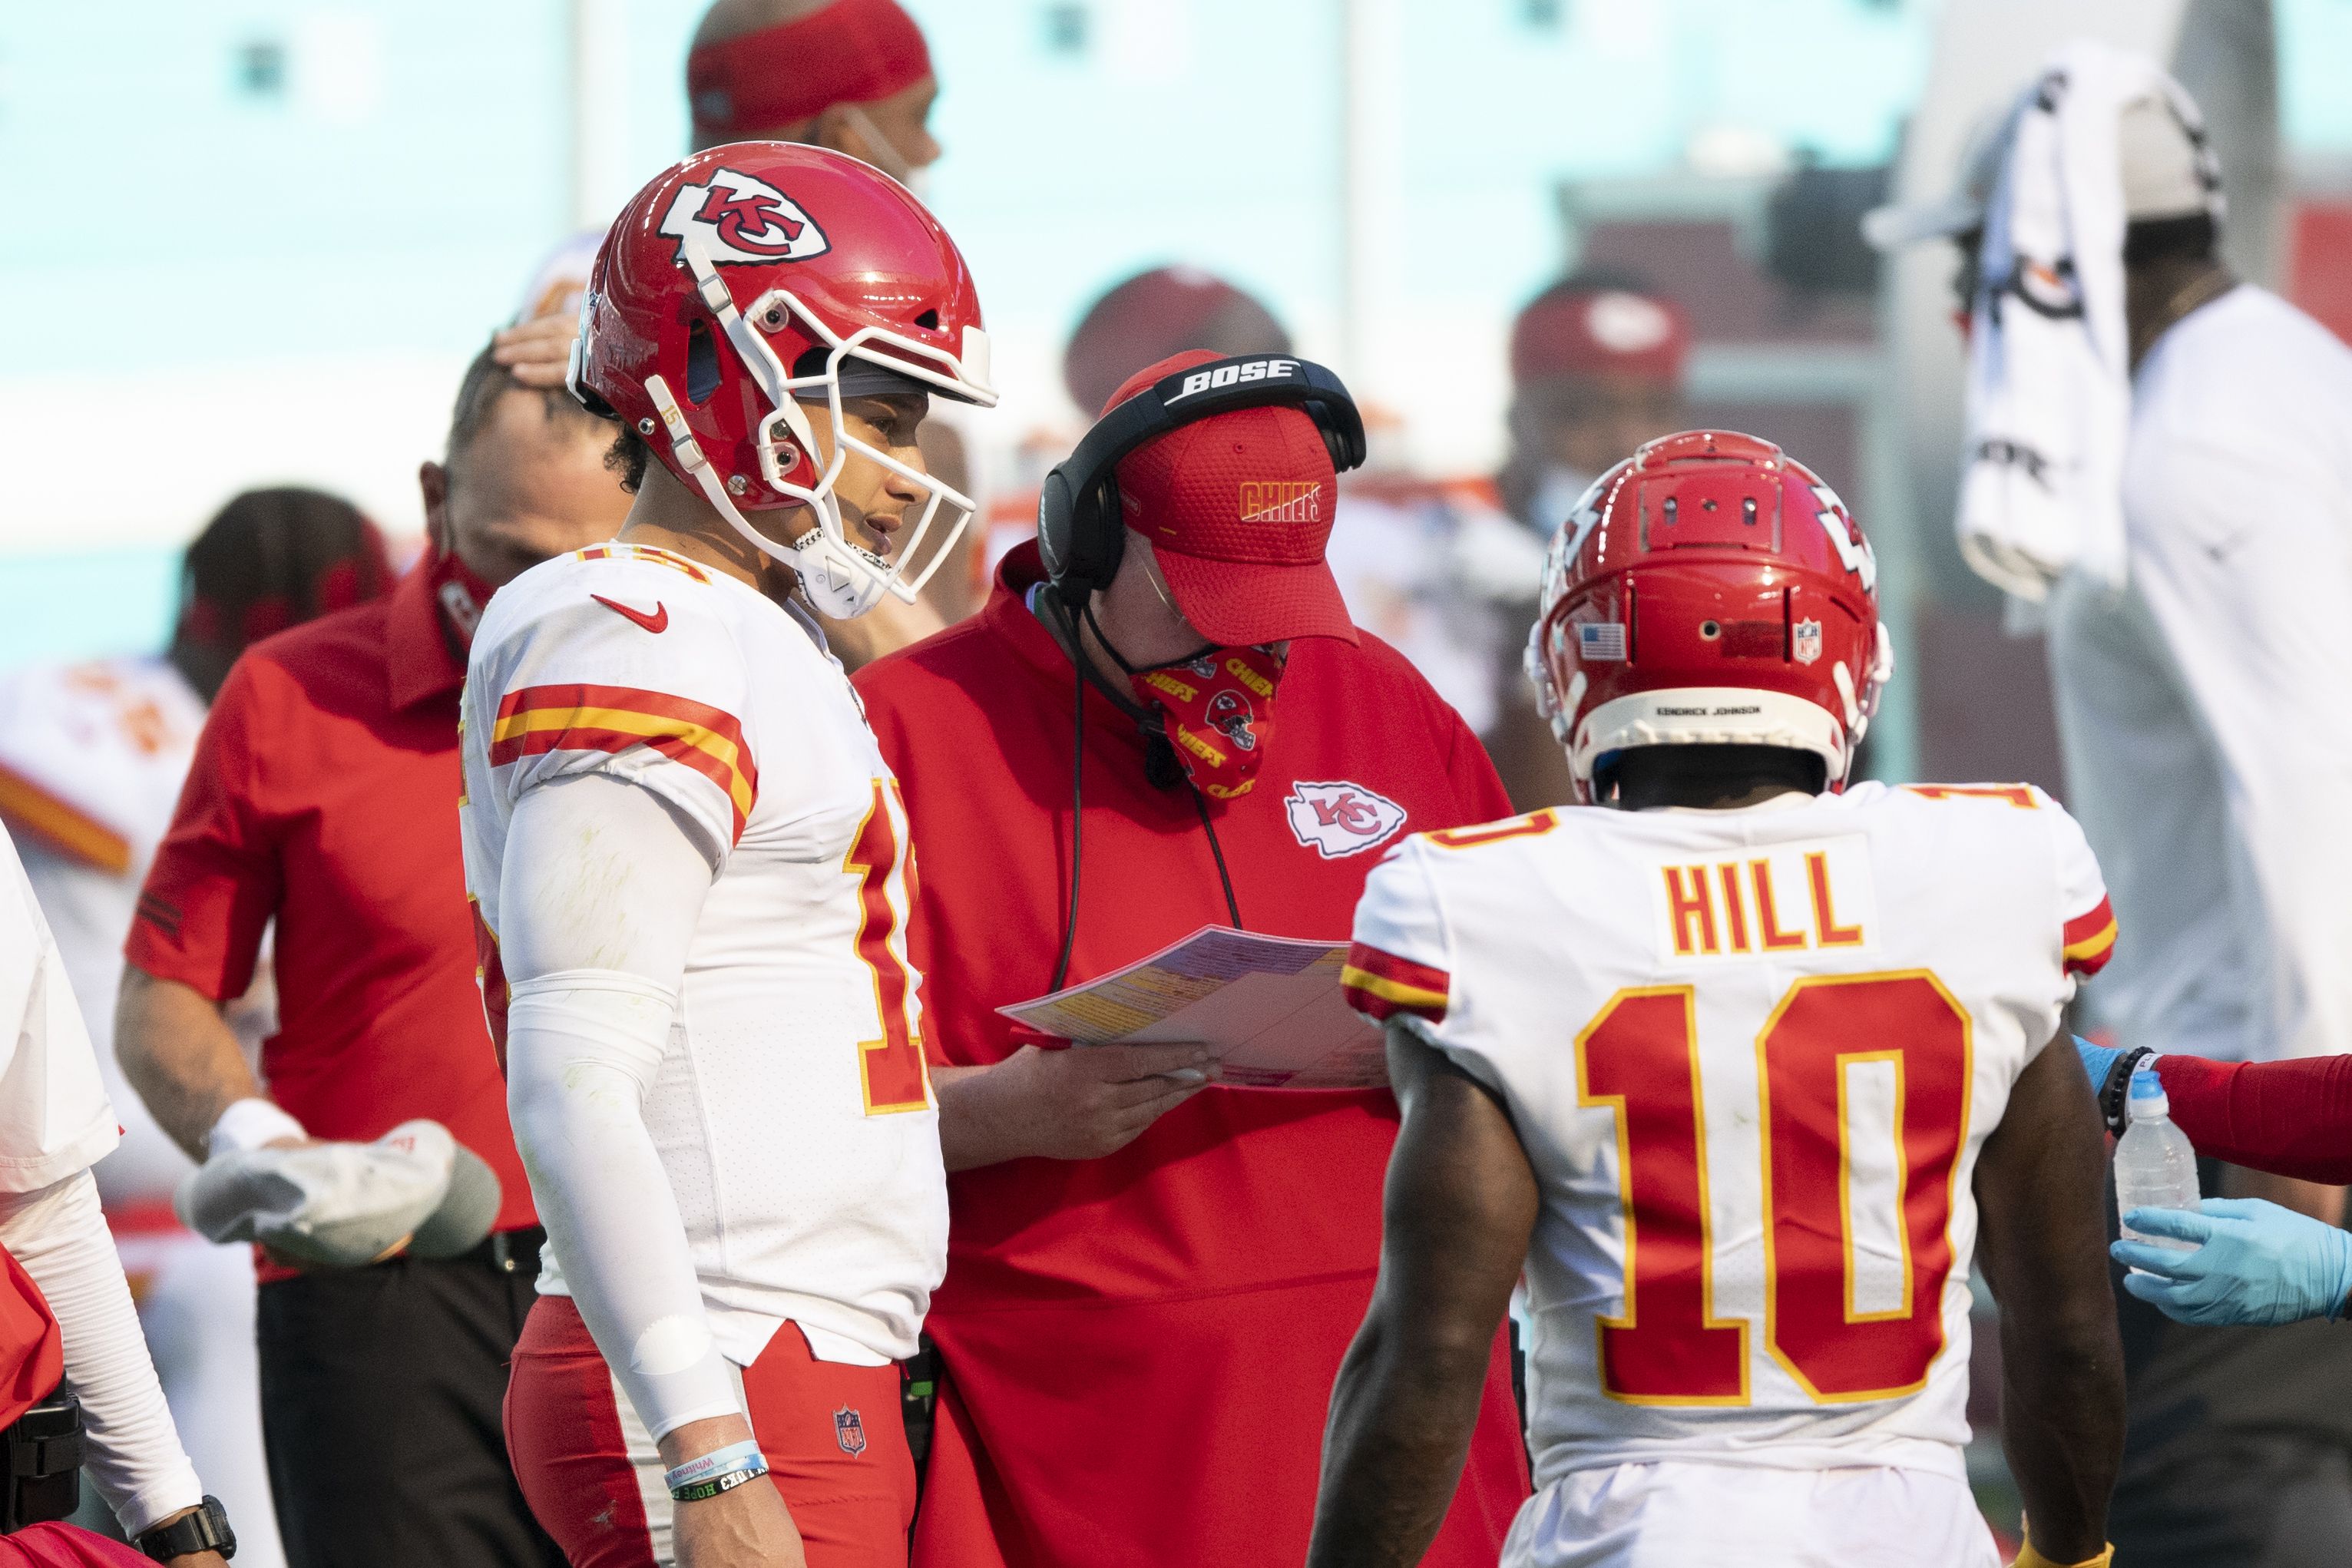 Andy Reid, Kansas City Chiefs in position to break records with playoff win